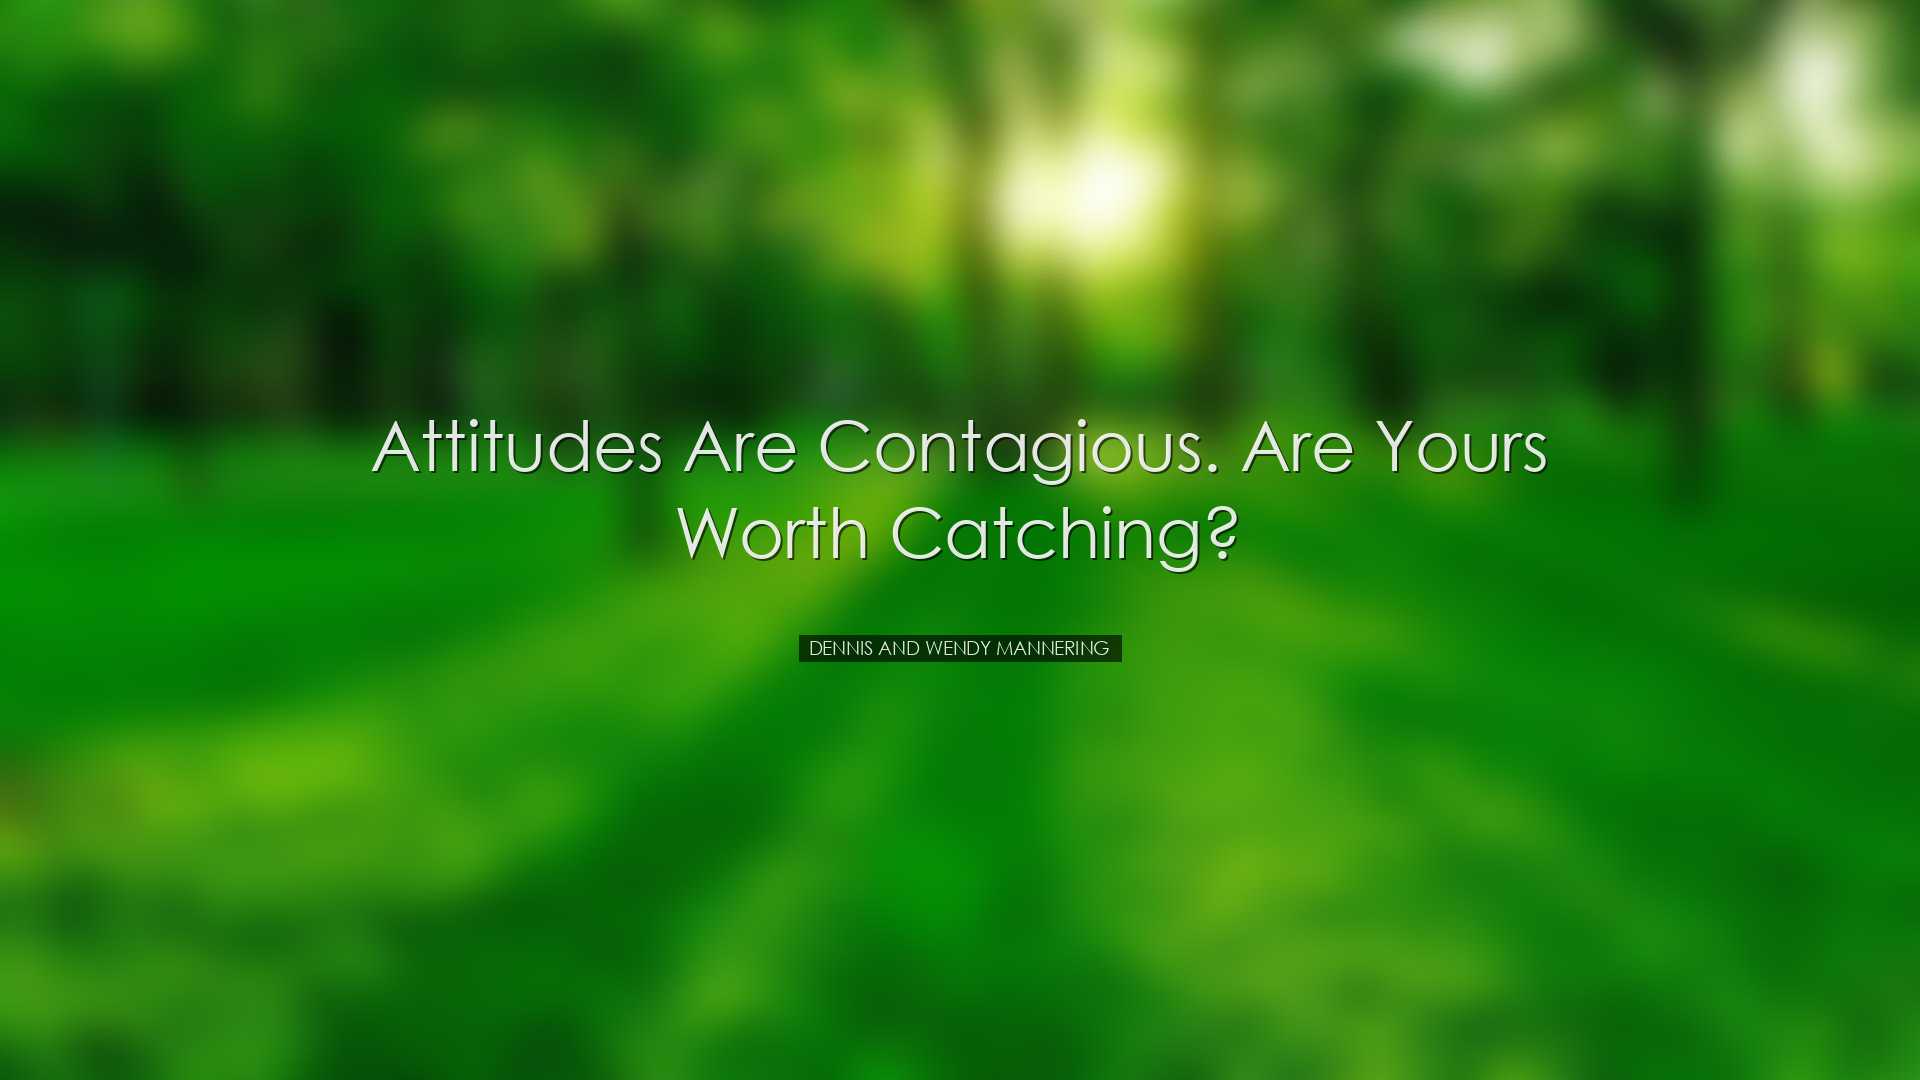 Attitudes are contagious. Are yours worth catching? - Dennis and W